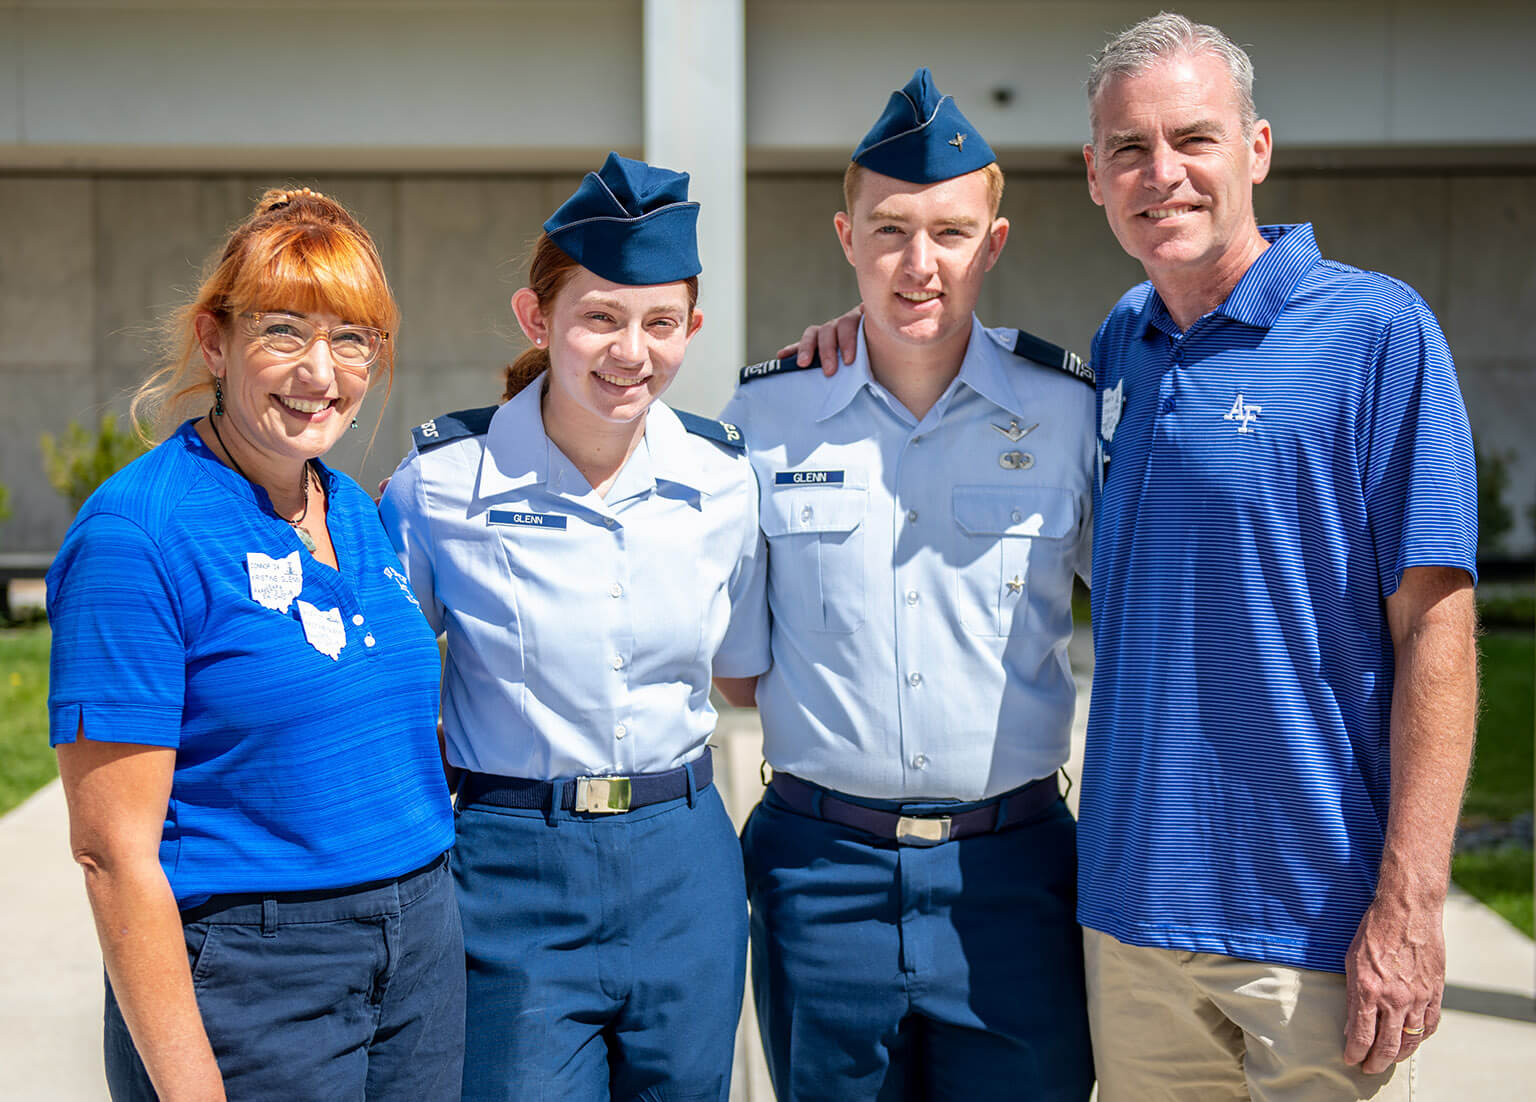 Cadet 4th Class Riley Glenn poses with her brother, Cadet 1st Class Connor Glenn, and their parents, Kristine and Tom Glenn